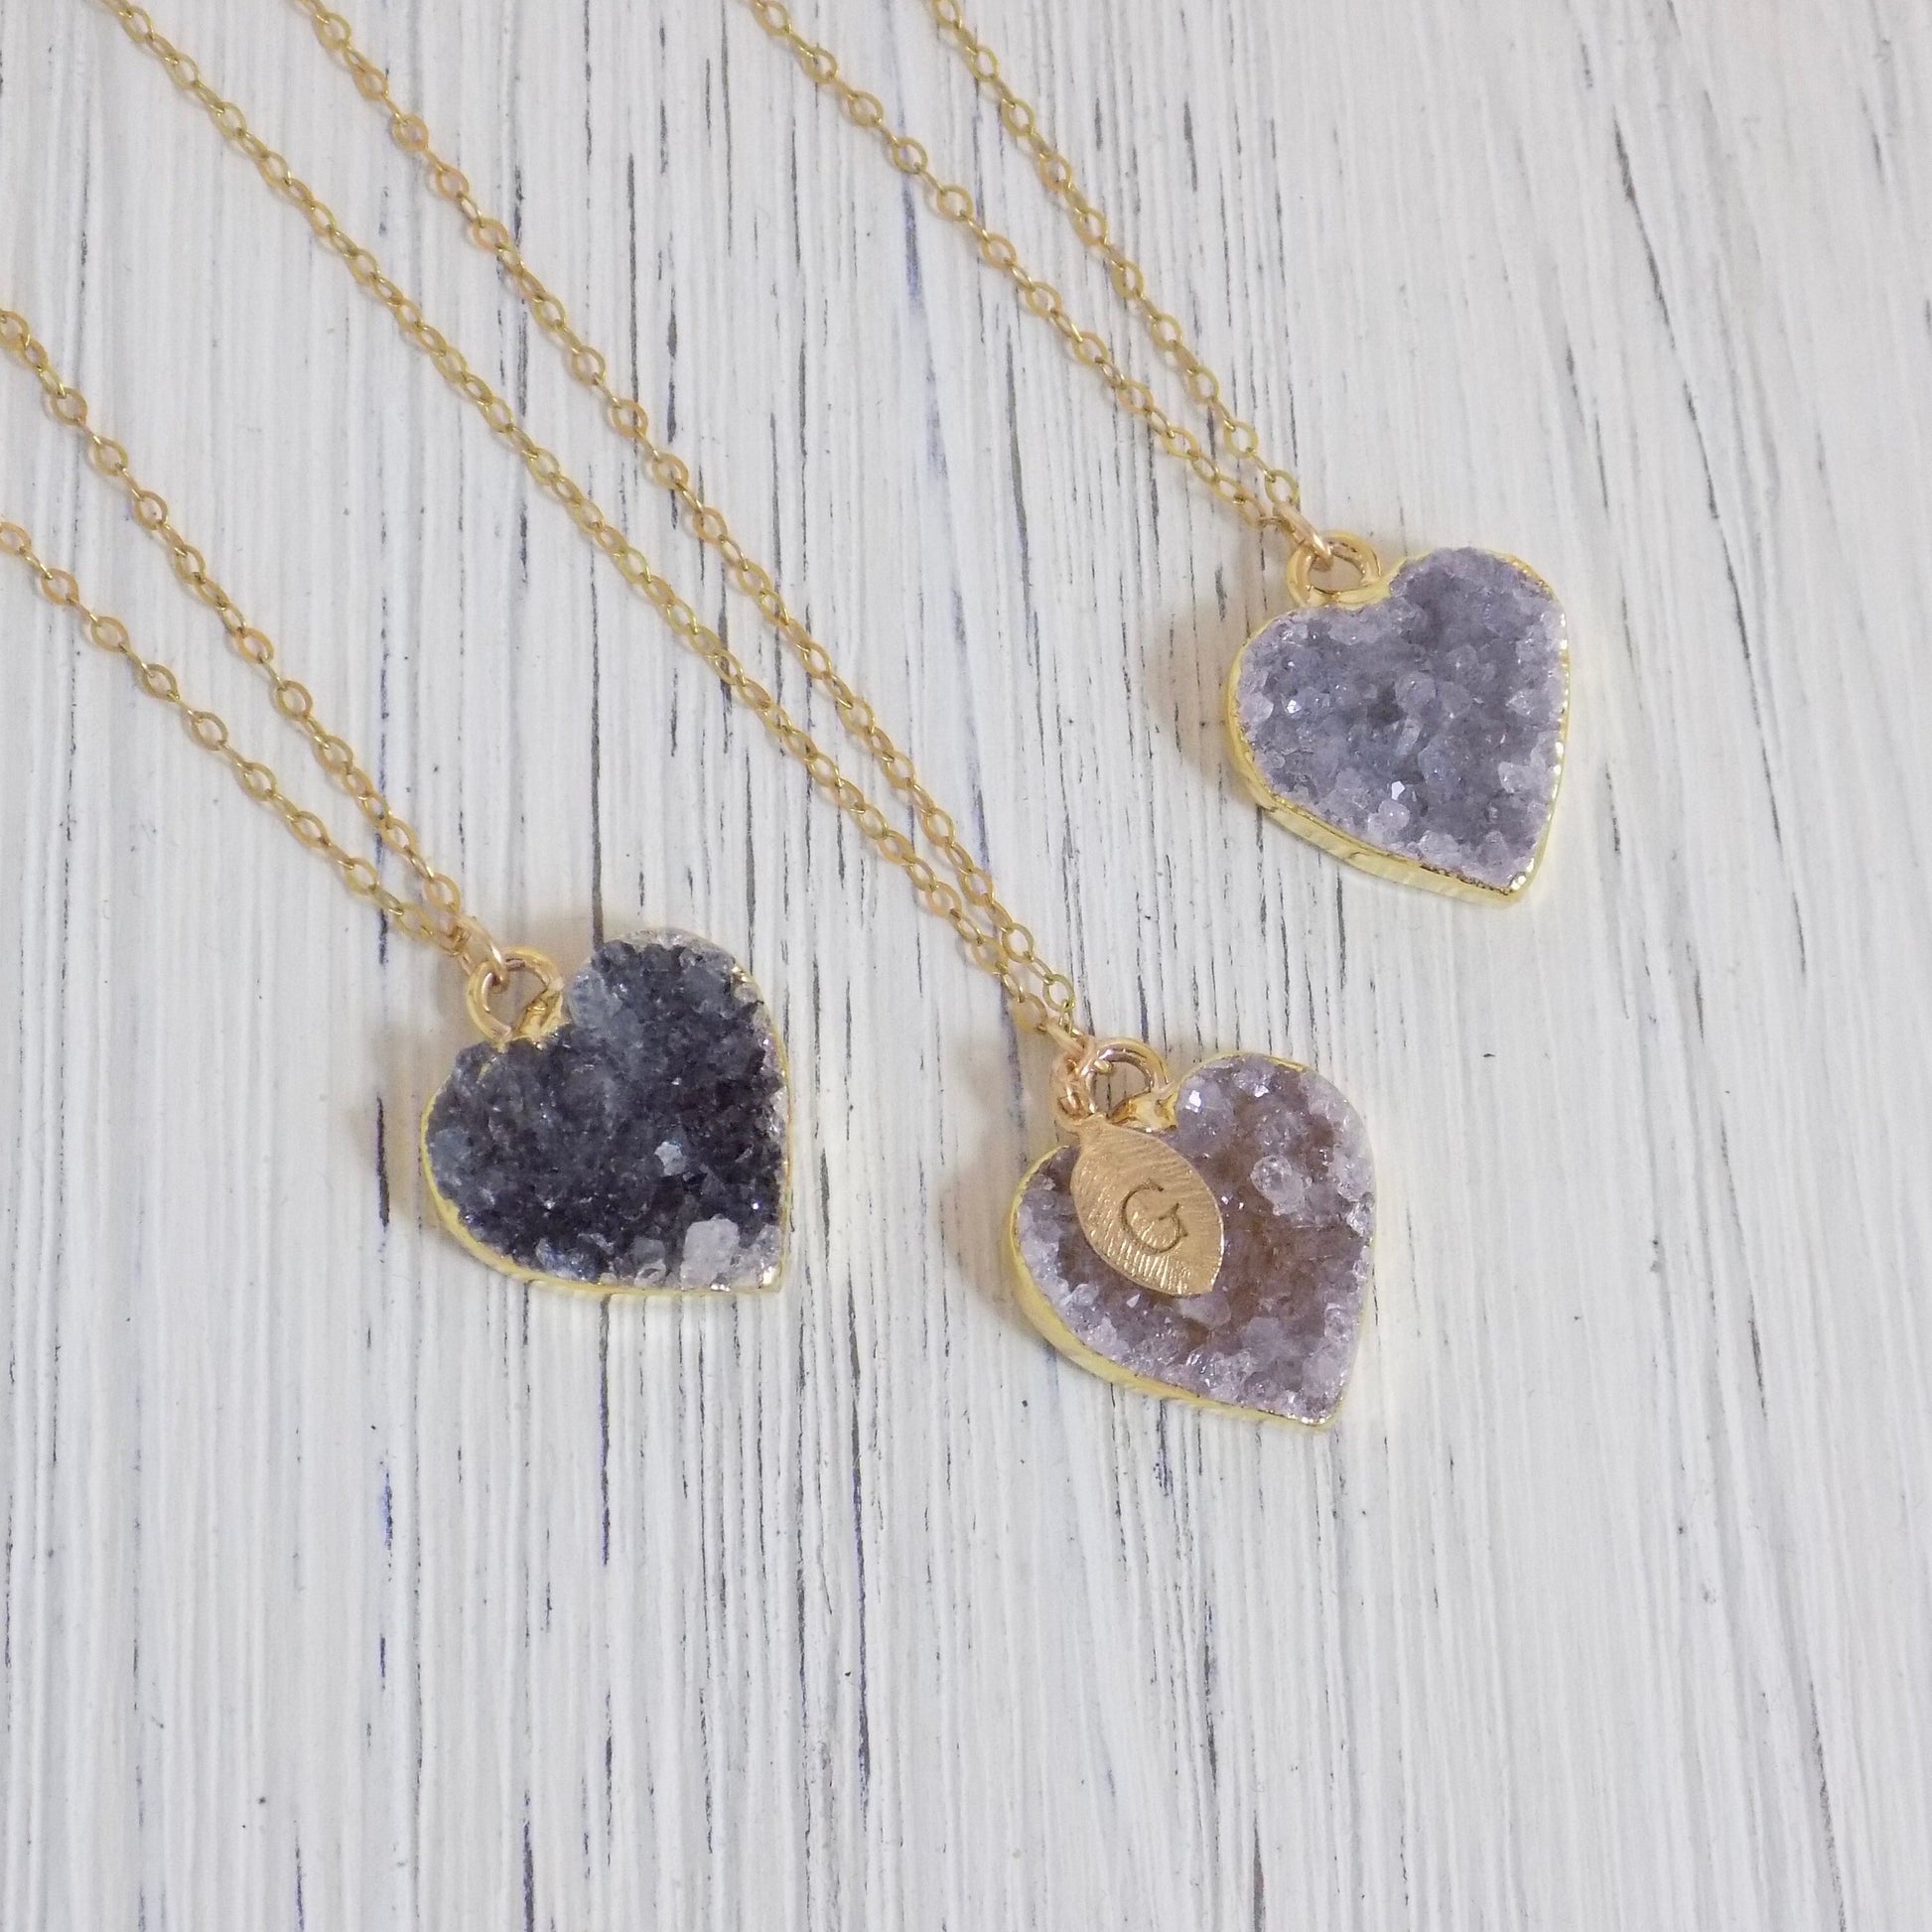 Druzy Necklace Heart, Personalized Necklace, Custom Necklace, Gemstone Necklace, Minimalist Necklace, Crystal Necklace Gift Women R9-112